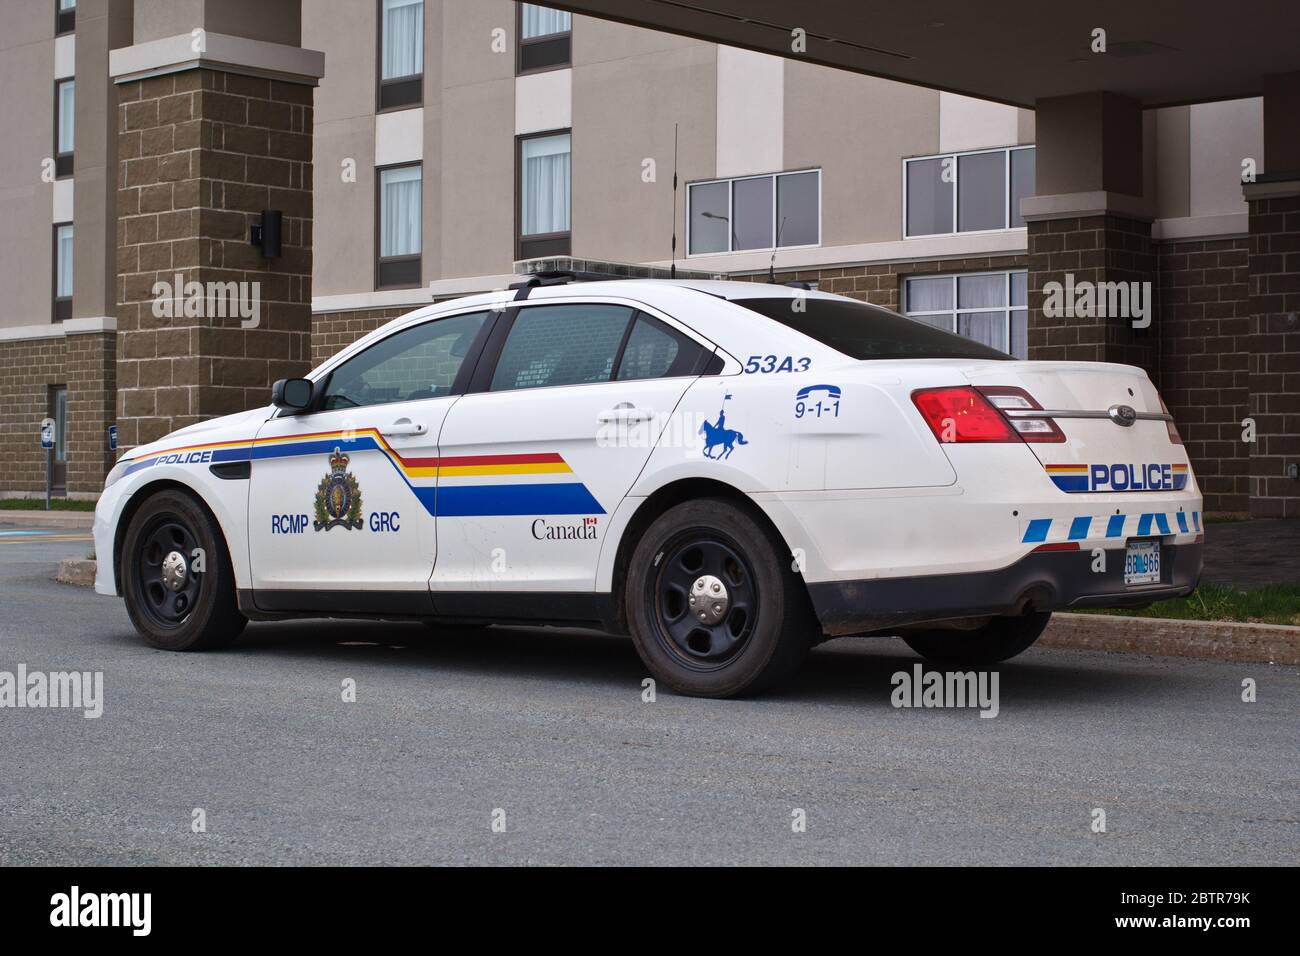 Truro, Canada - May 27, 2020: Royal Canadian Mounted Police or RCMP cruiser. The RCMP is Canada's federal and national police agency. Stock Photo